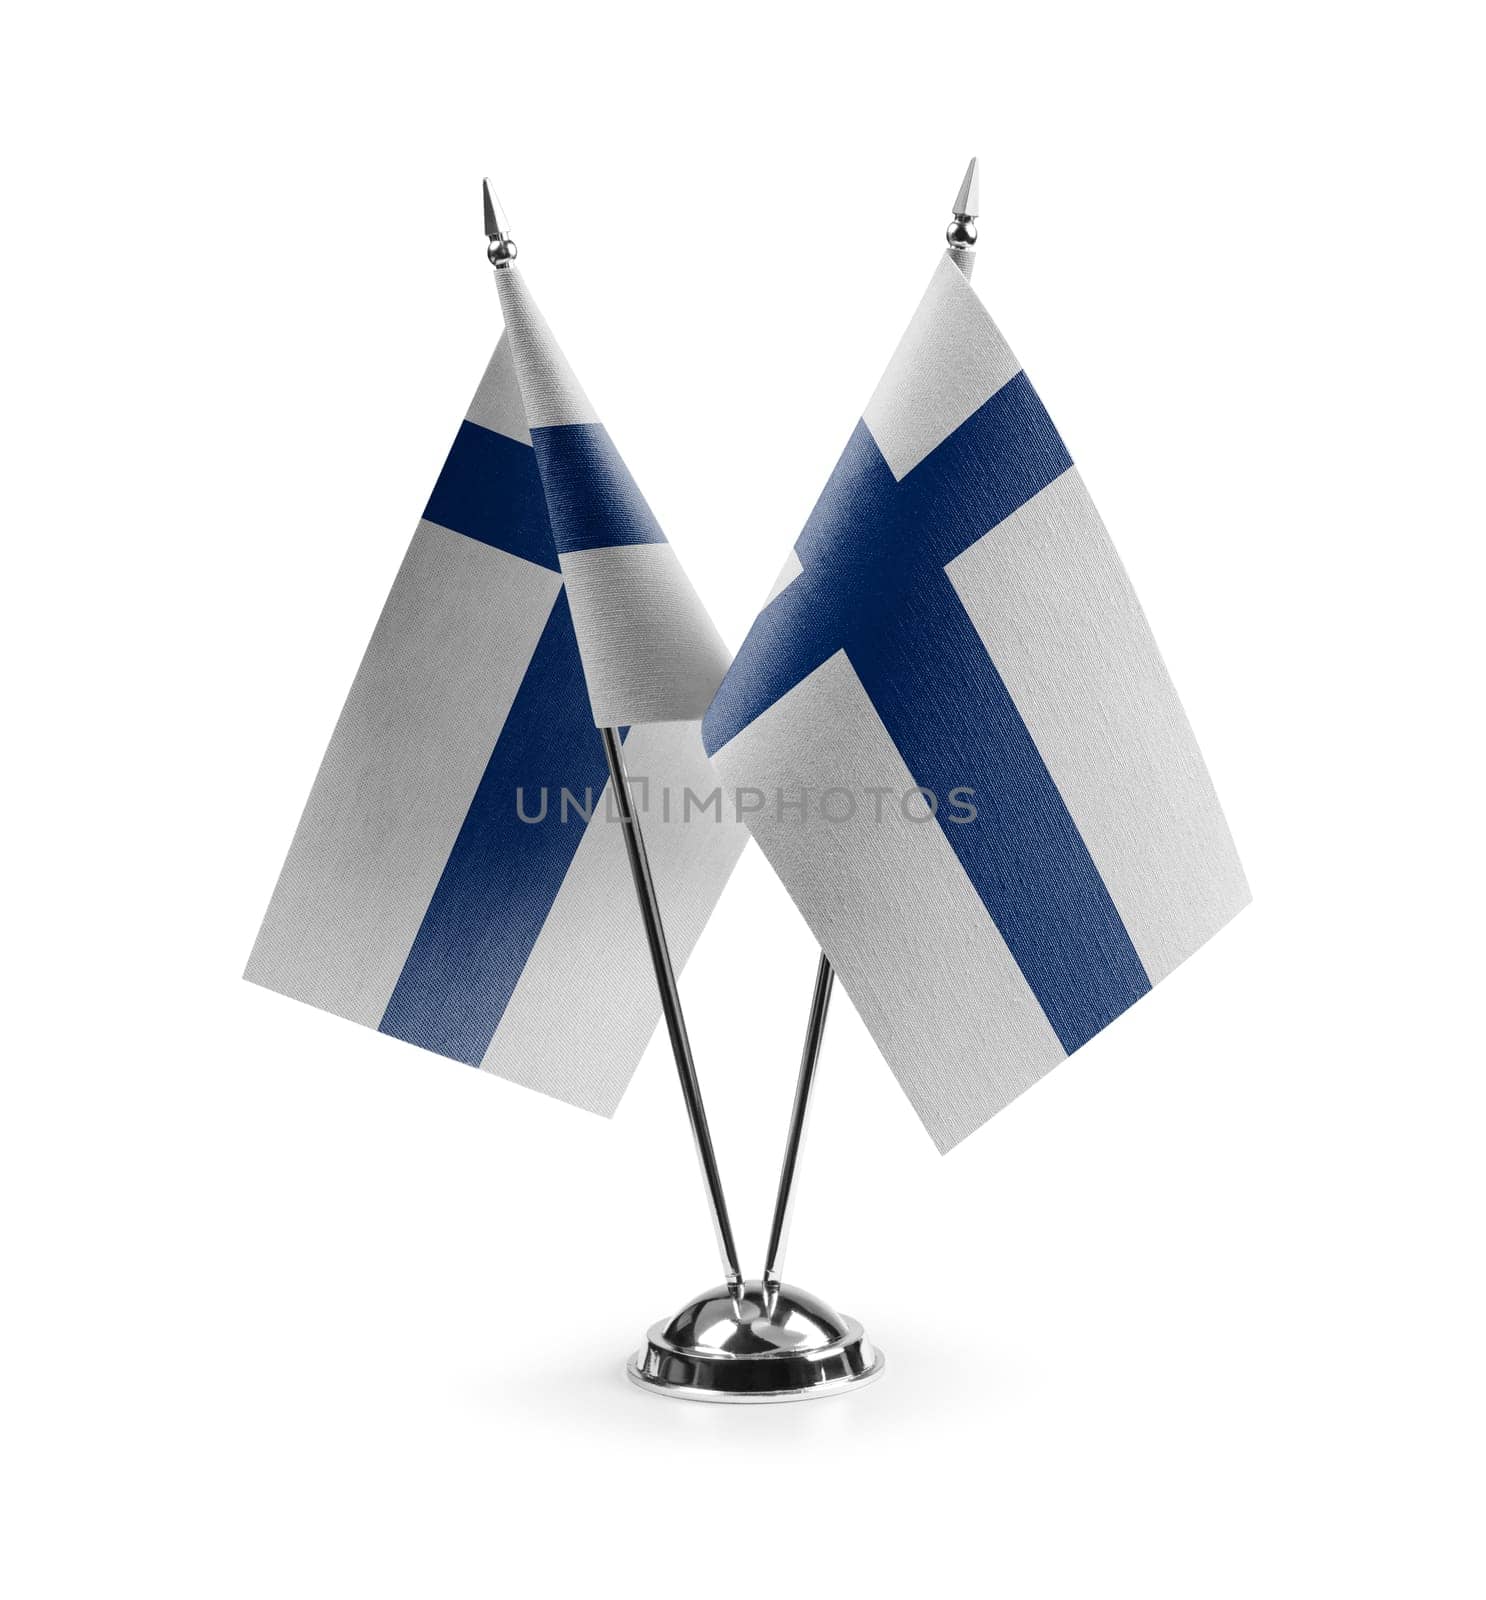 Small national flags of the Finland on a white background.